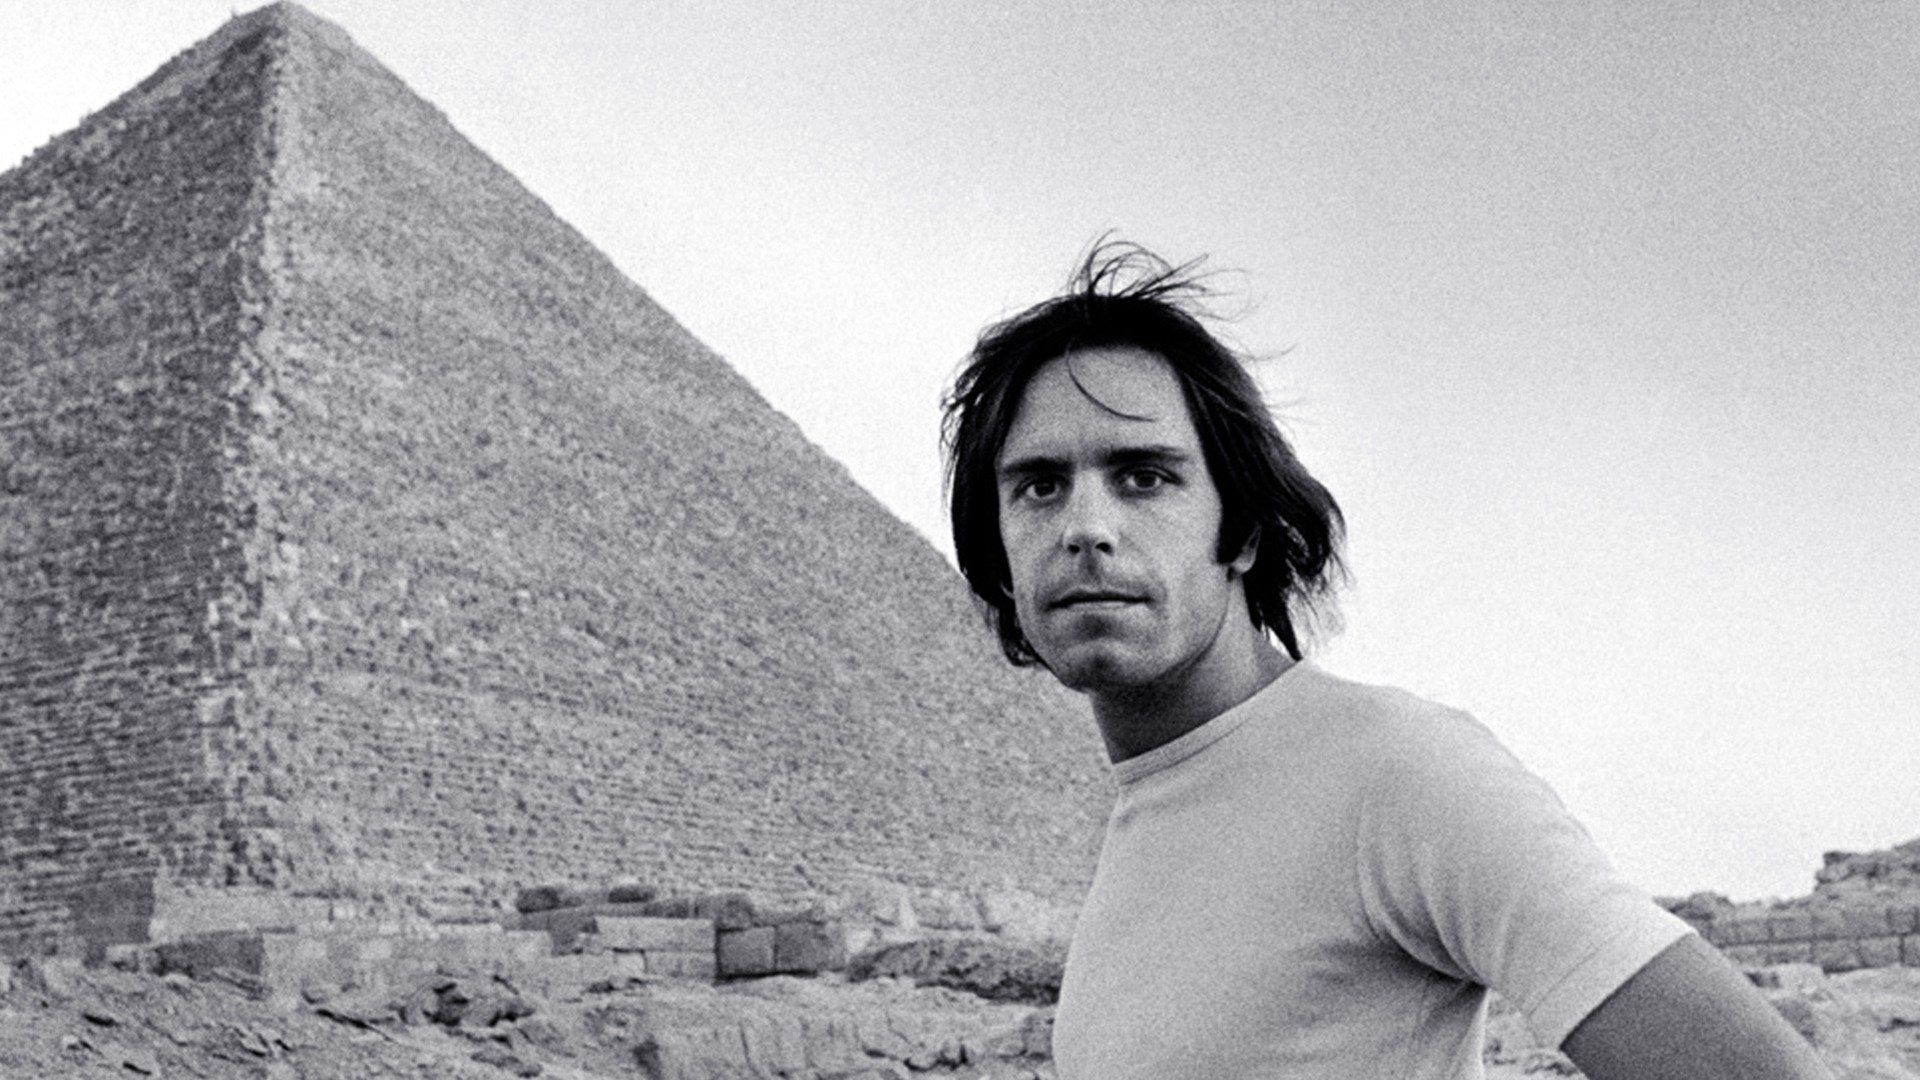 The Other One: The Long, Strange Trip of Bob Weir Backdrop